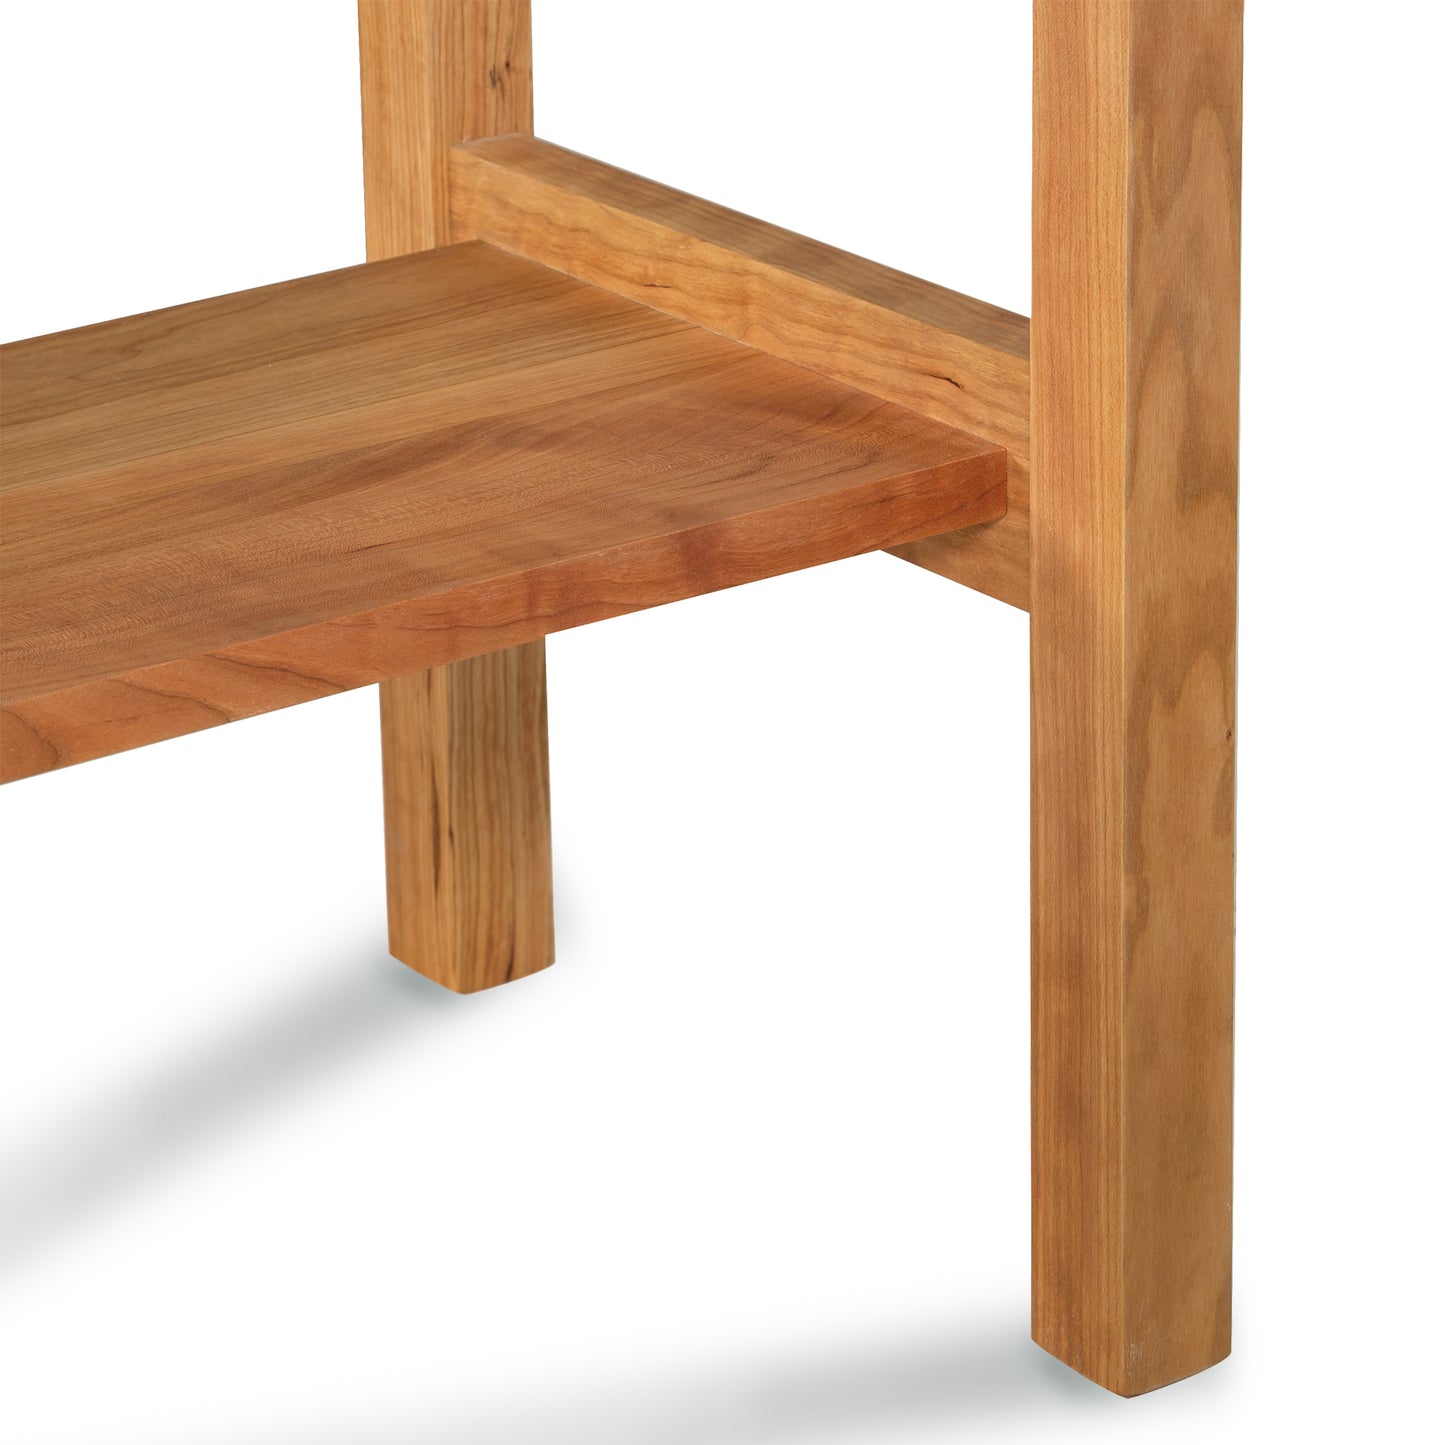 A close-up view of a handcrafted Vermont Furniture Designs Modern Craftsman 2-Drawer Console Table, showing the detail of the corner joinery and the wood grain.